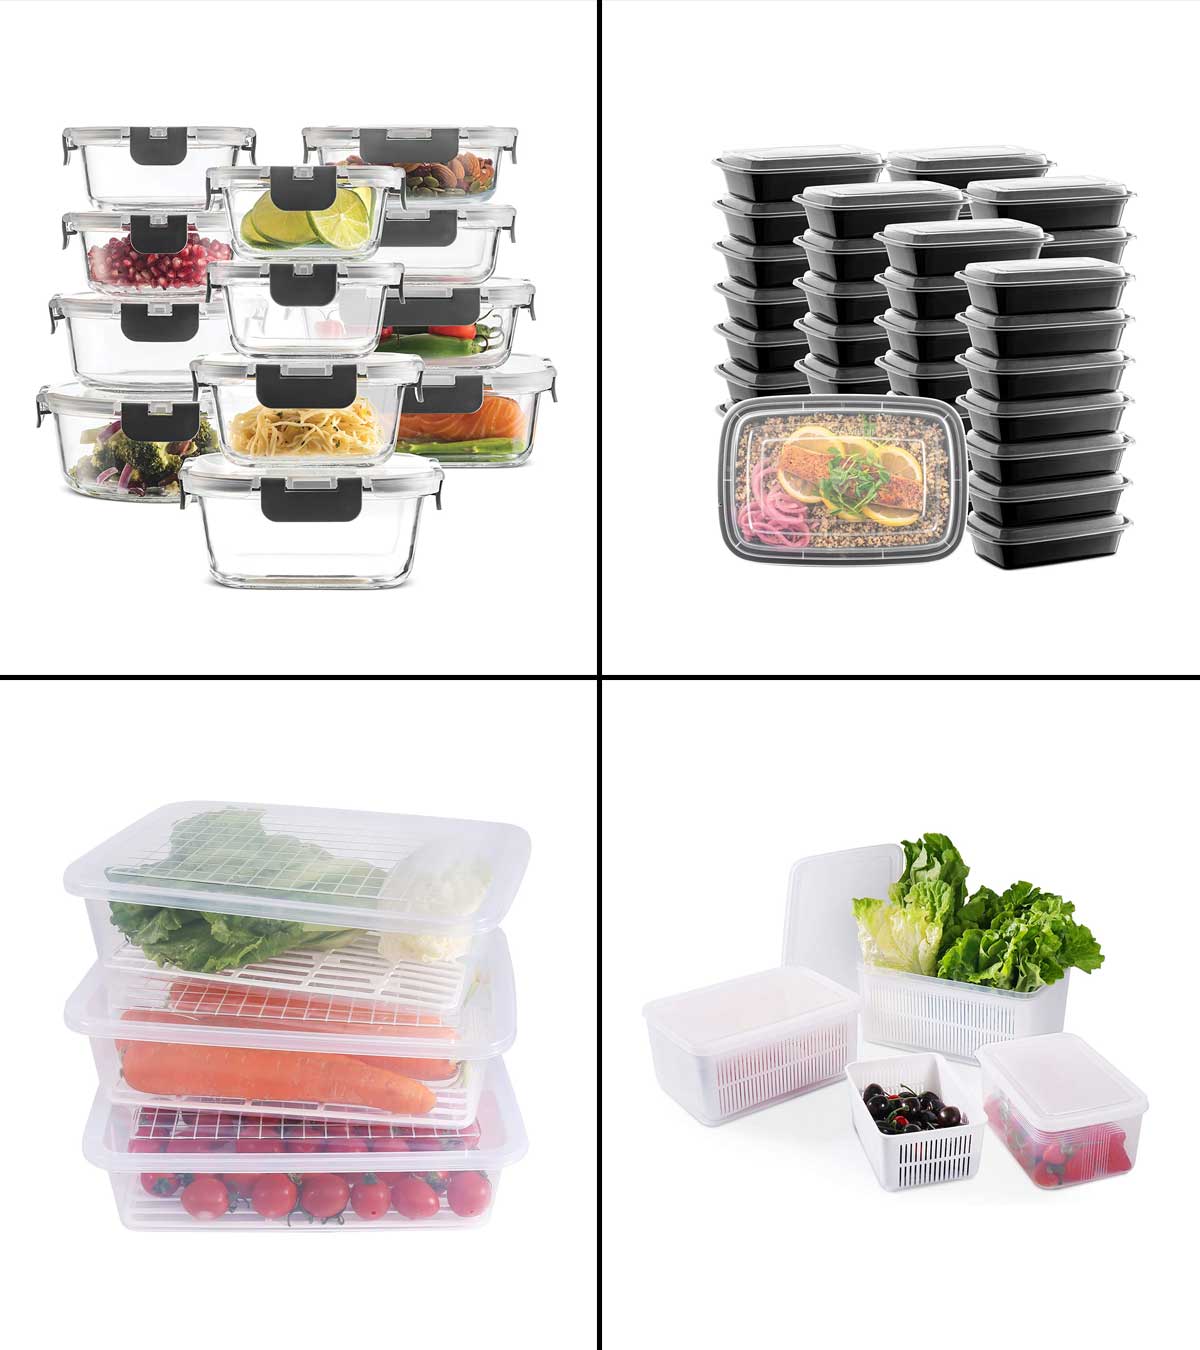 https://www.momjunction.com/wp-content/uploads/2021/07/15-Best-Freezer-Containers-For-Food-In-2021.jpg